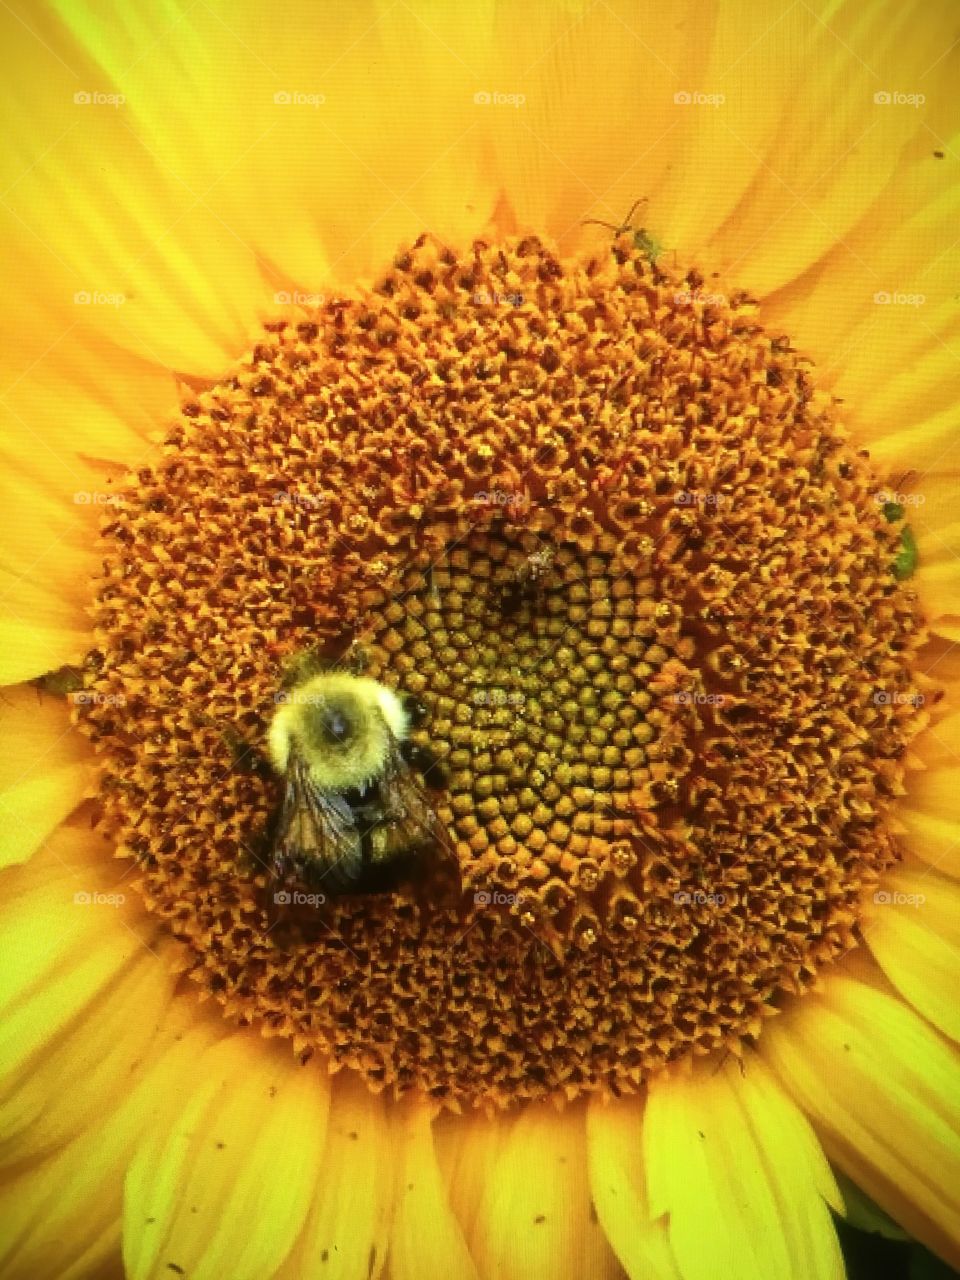 Bee in a sunflower